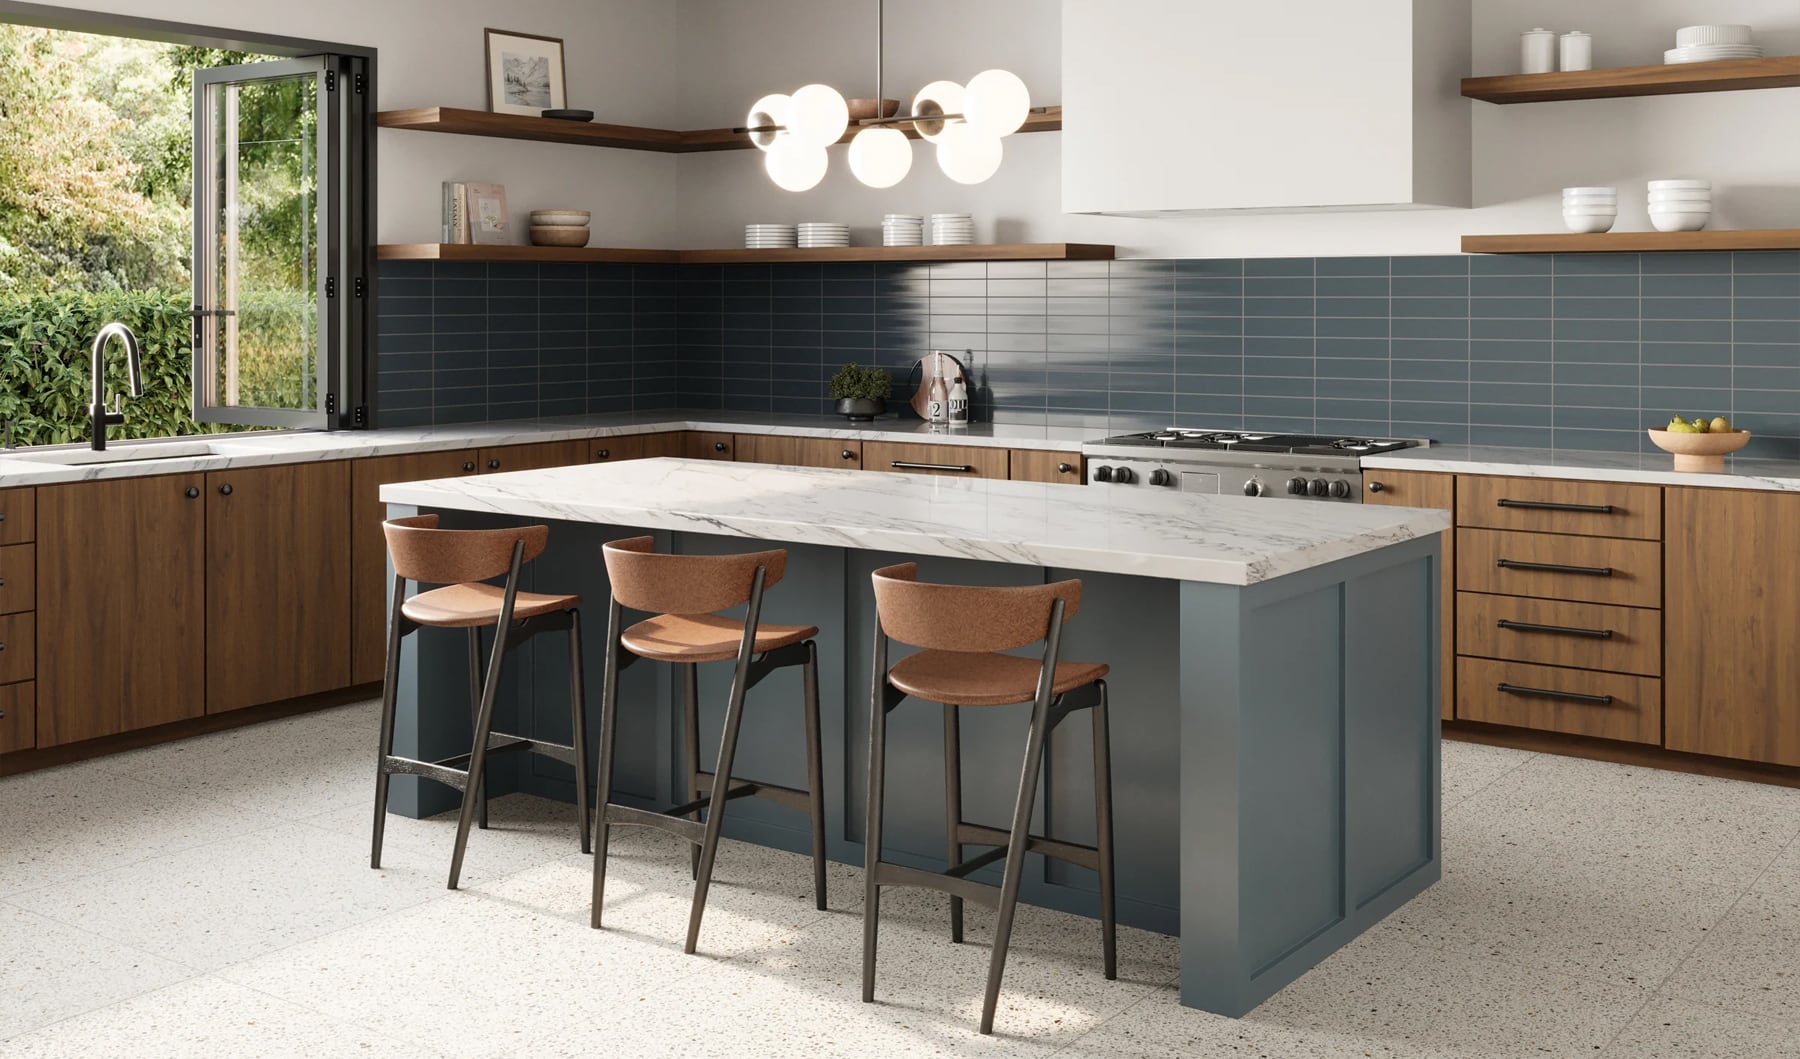 Sleek terrazzo look tile complements the modern kitchen's clean lines and blue backsplash